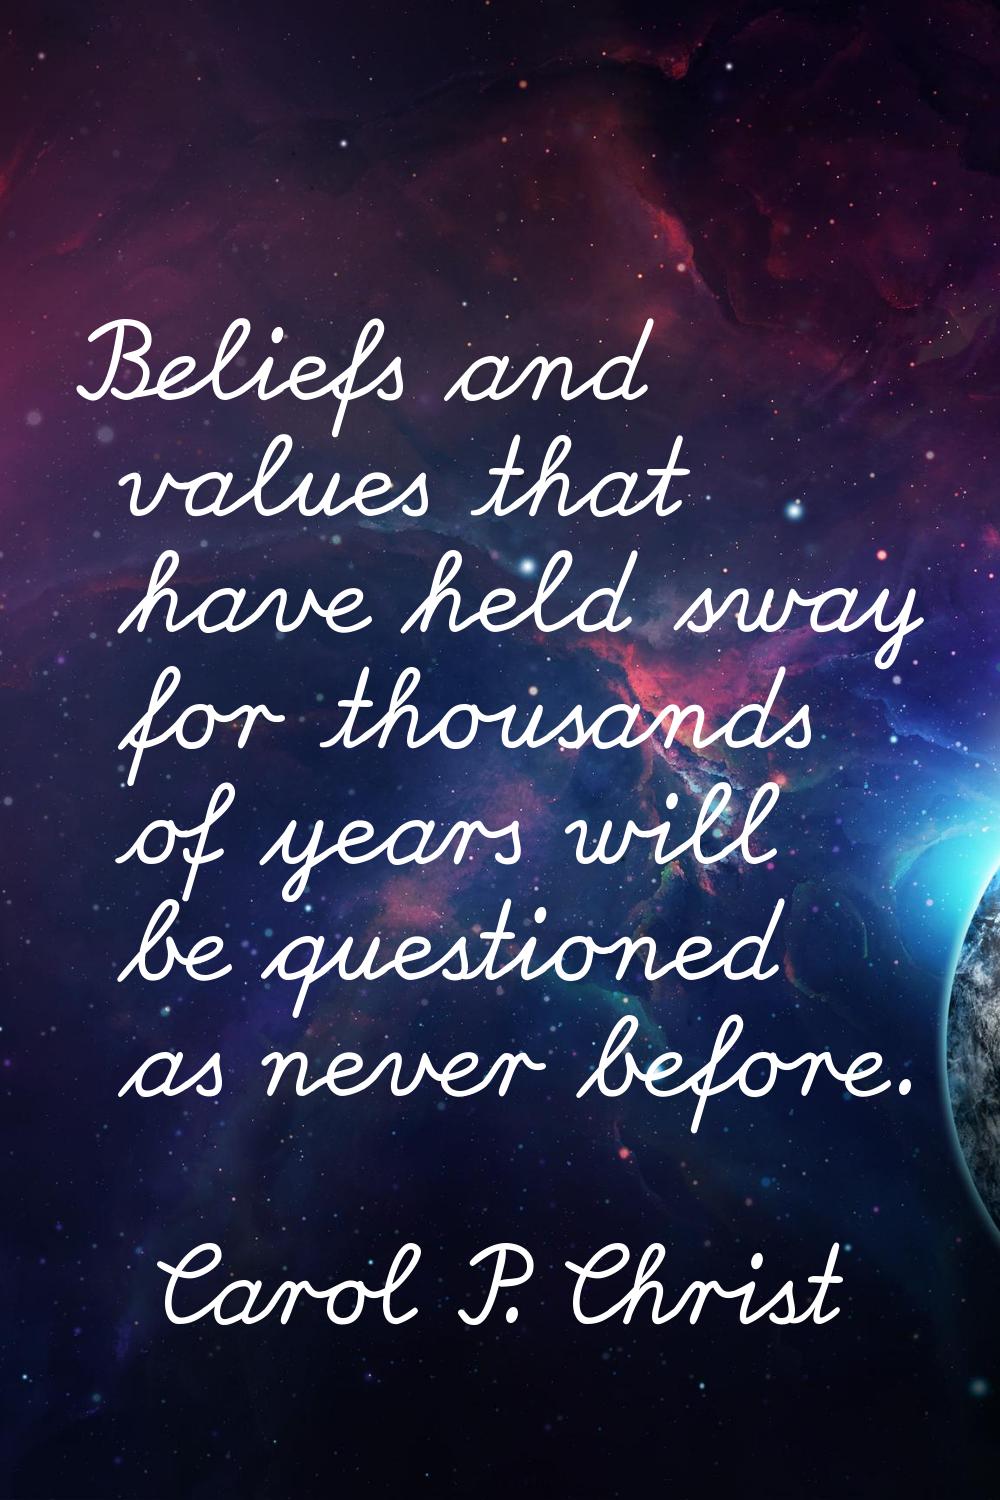 Beliefs and values that have held sway for thousands of years will be questioned as never before.